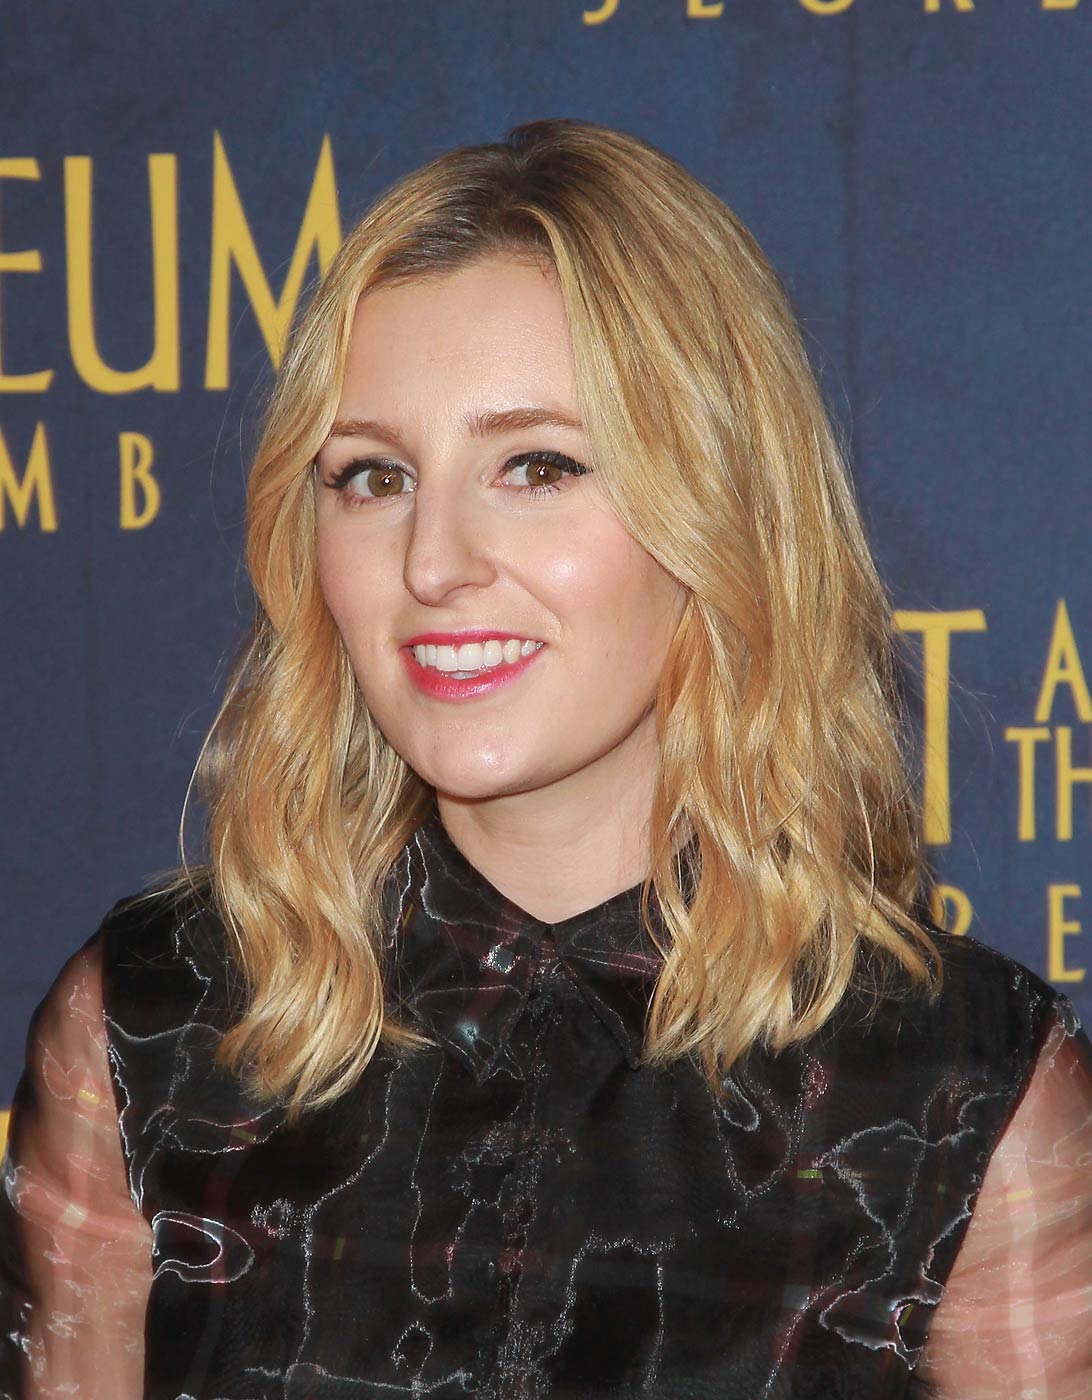 Laura Carmichael attends the <em>Night At The Museum: Secret Of The Tomb</em> New York premiere at the Ziegfeld Theater on December 11, 2014 in New York City. (Jim Spellman—WireImage/Getty Images)